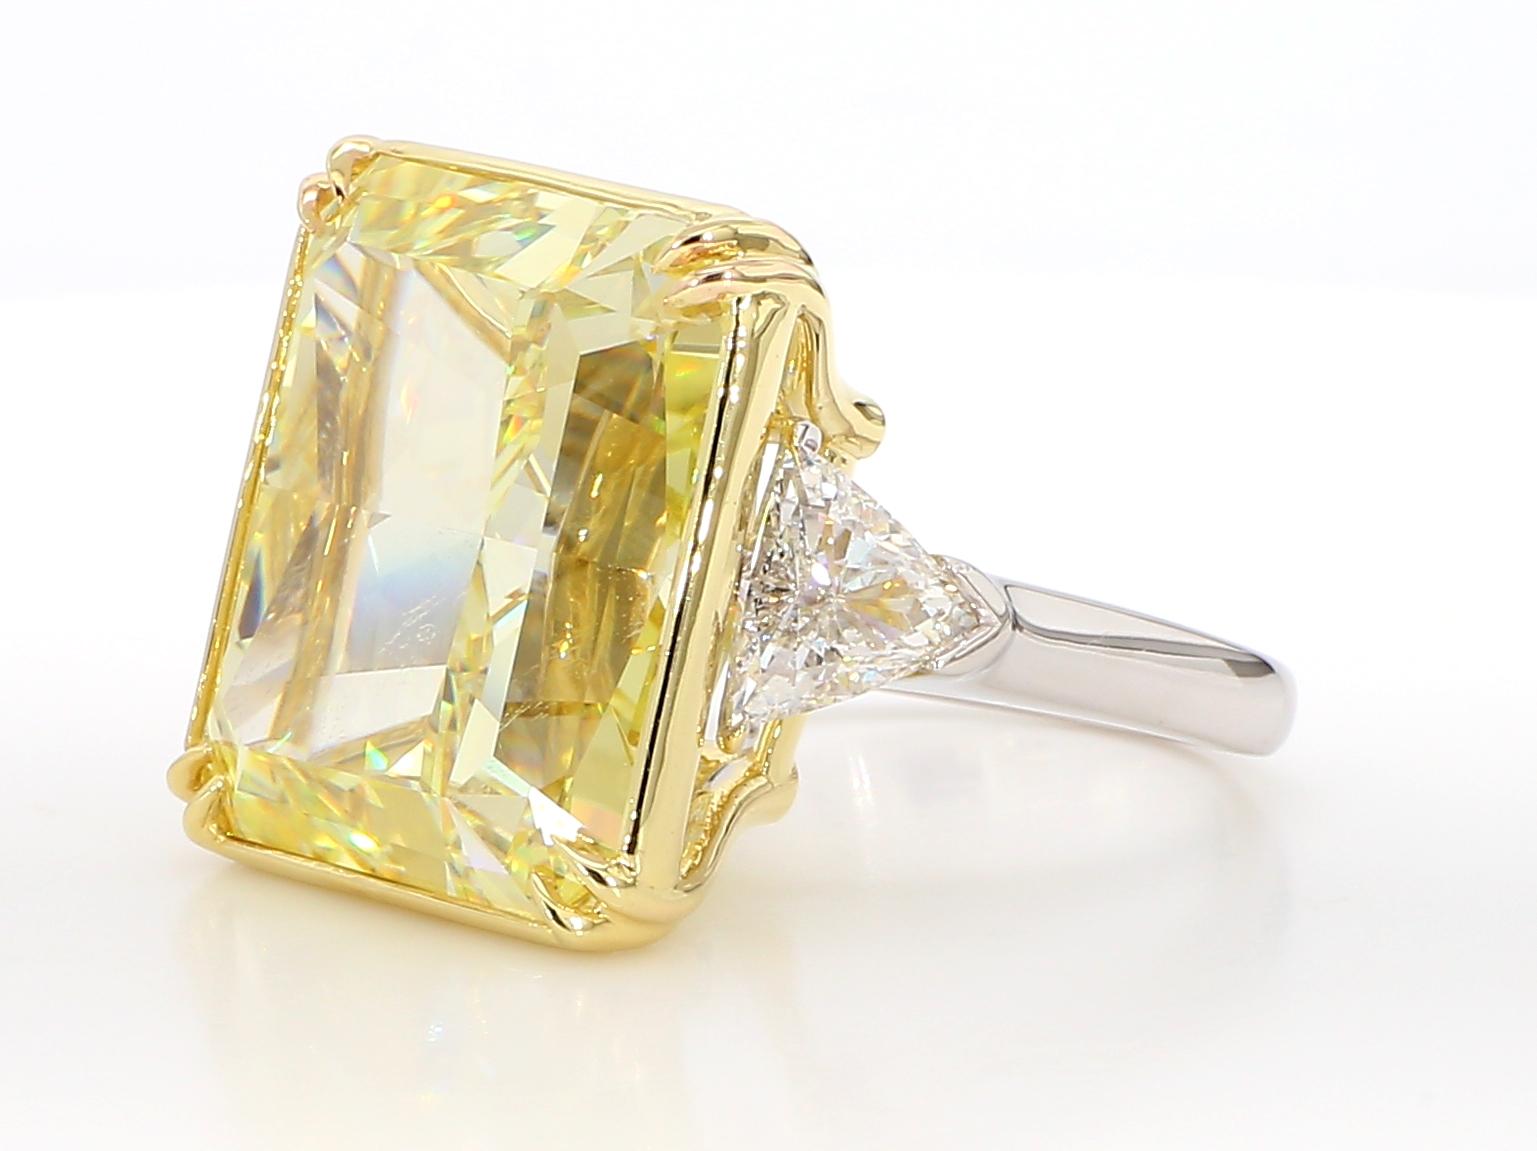 Contemporary 30 Carat Fancy Intense Yellow Diamond Engagement Ring, In Platinum GIA Certified For Sale